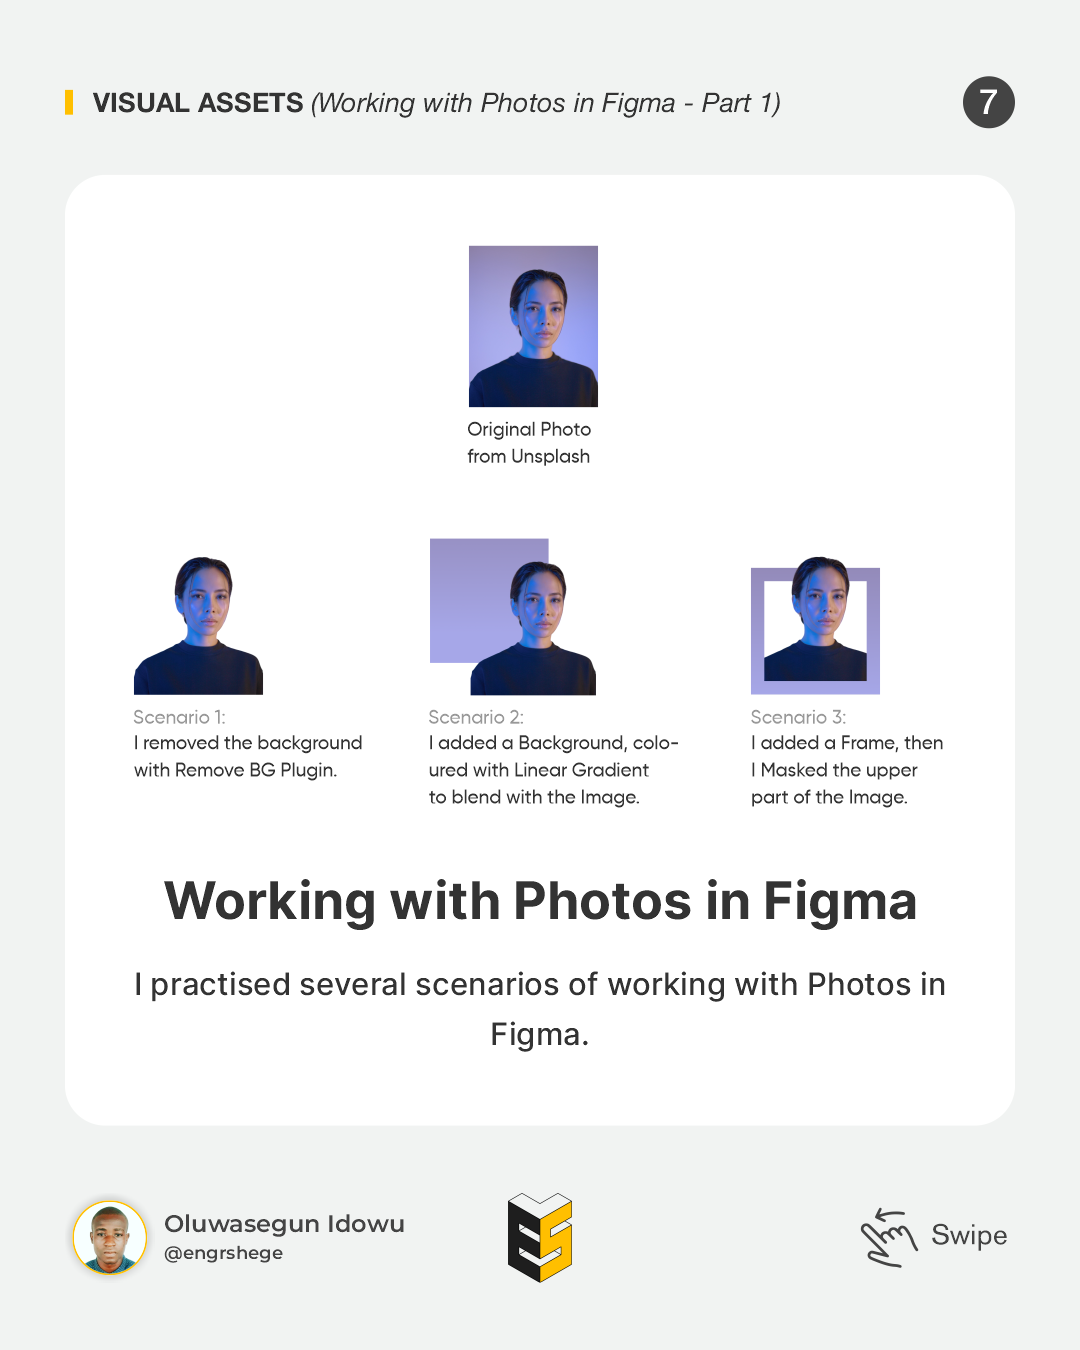 Working with Photos in Figma - Part 1